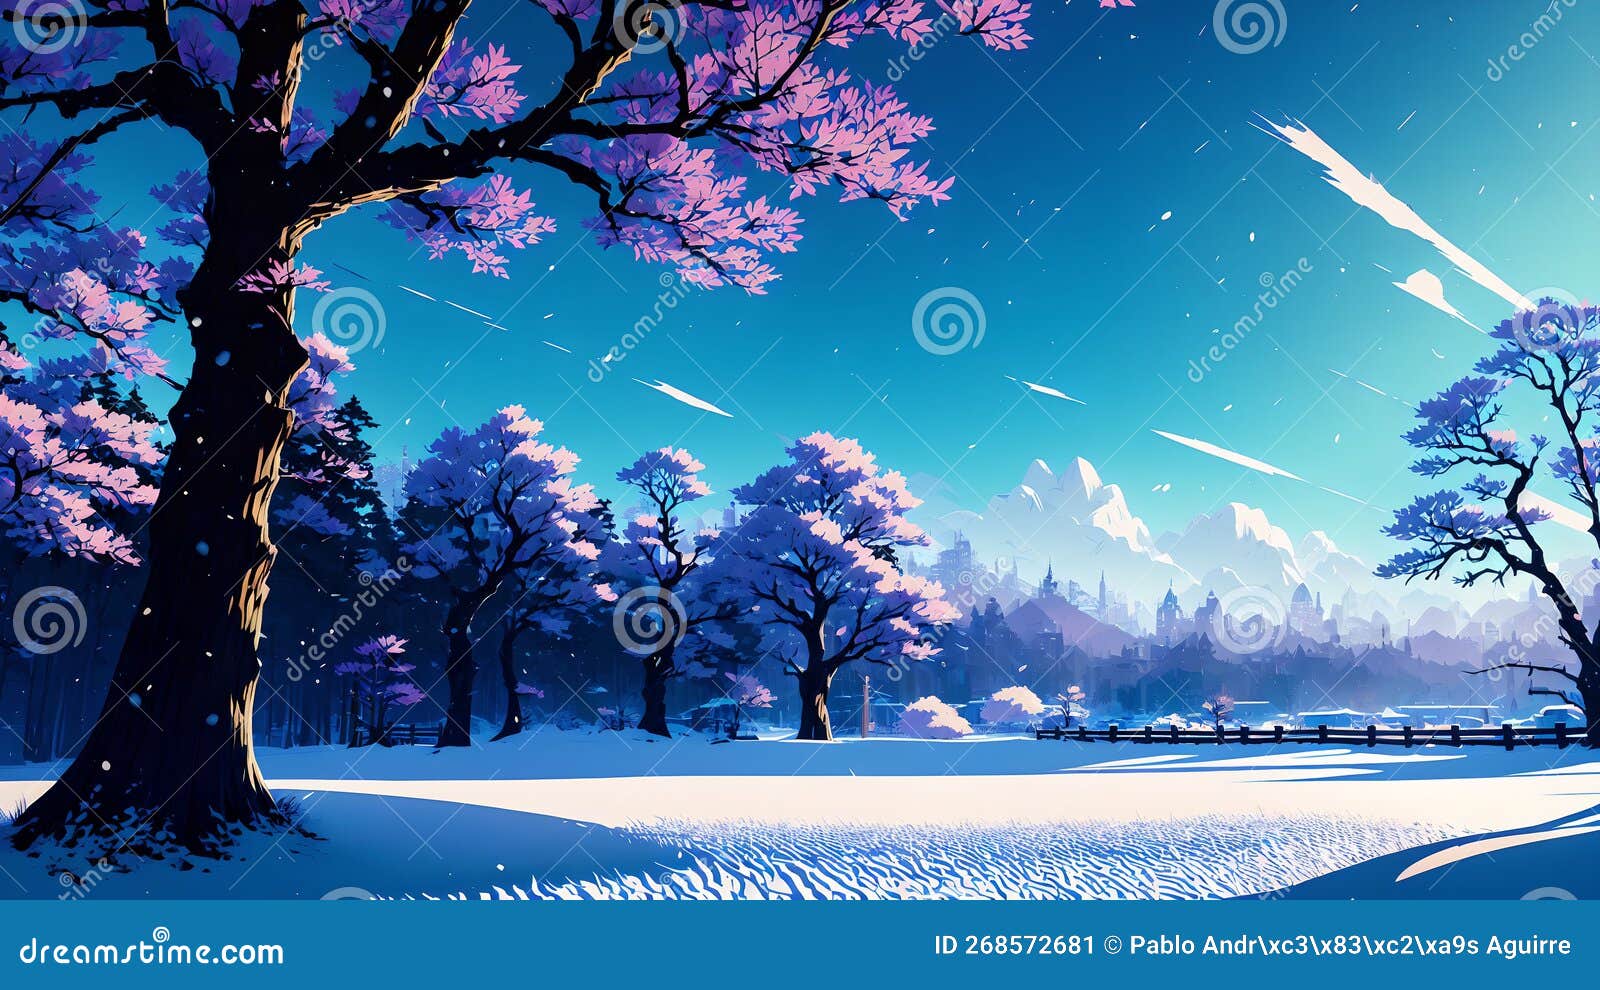 1866 Snow Background Anime Images Stock Photos  Vectors  Shutterstock